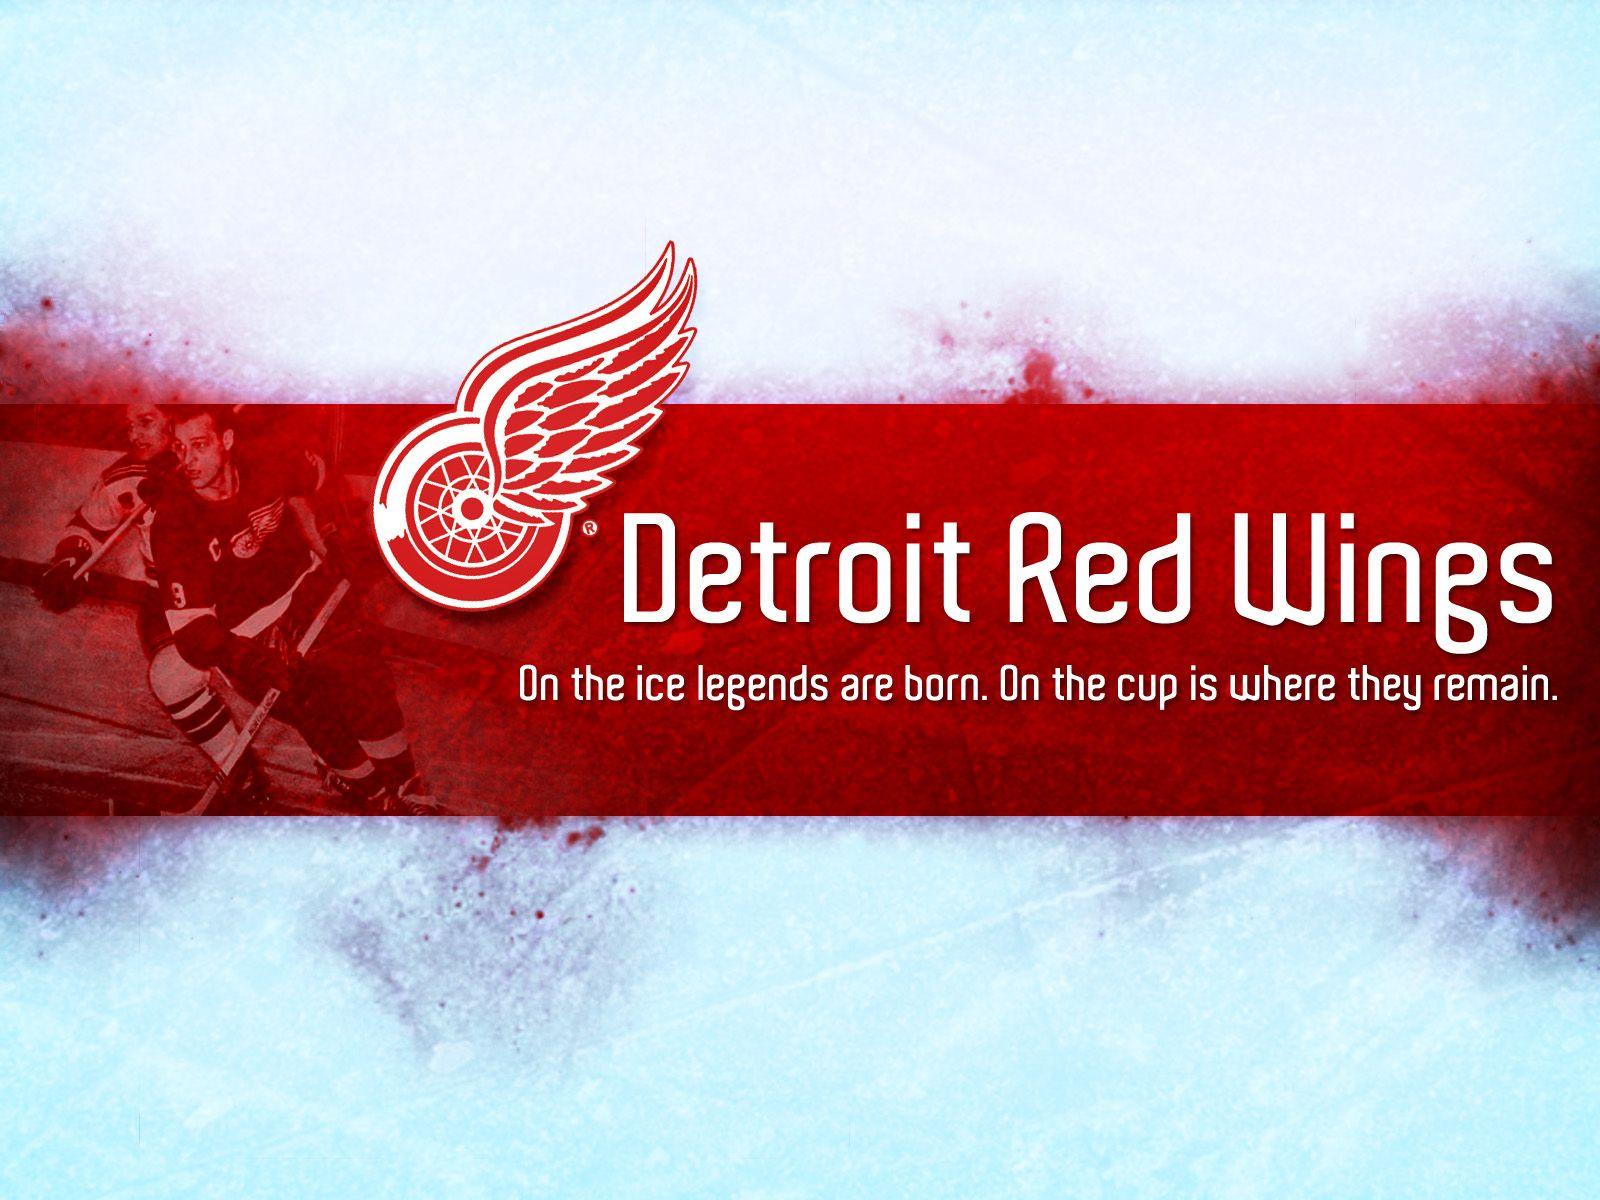 Detroit Red Wing Sports Logo - Detroit Red Wings Wallpaper 19 X 1200